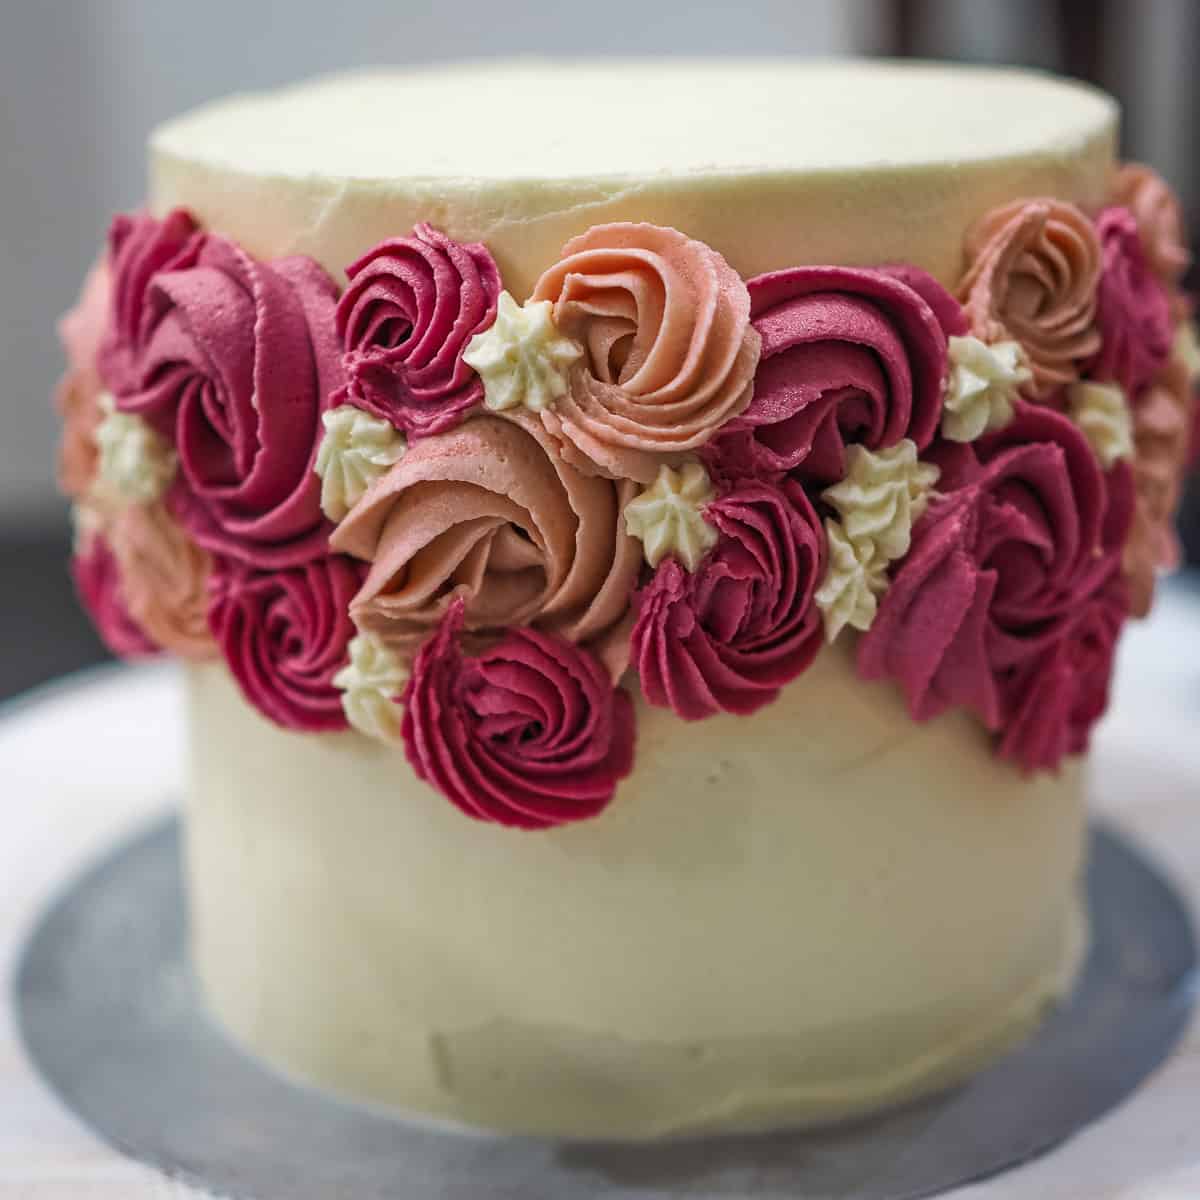 A round cake with buttercream flowers on the sides